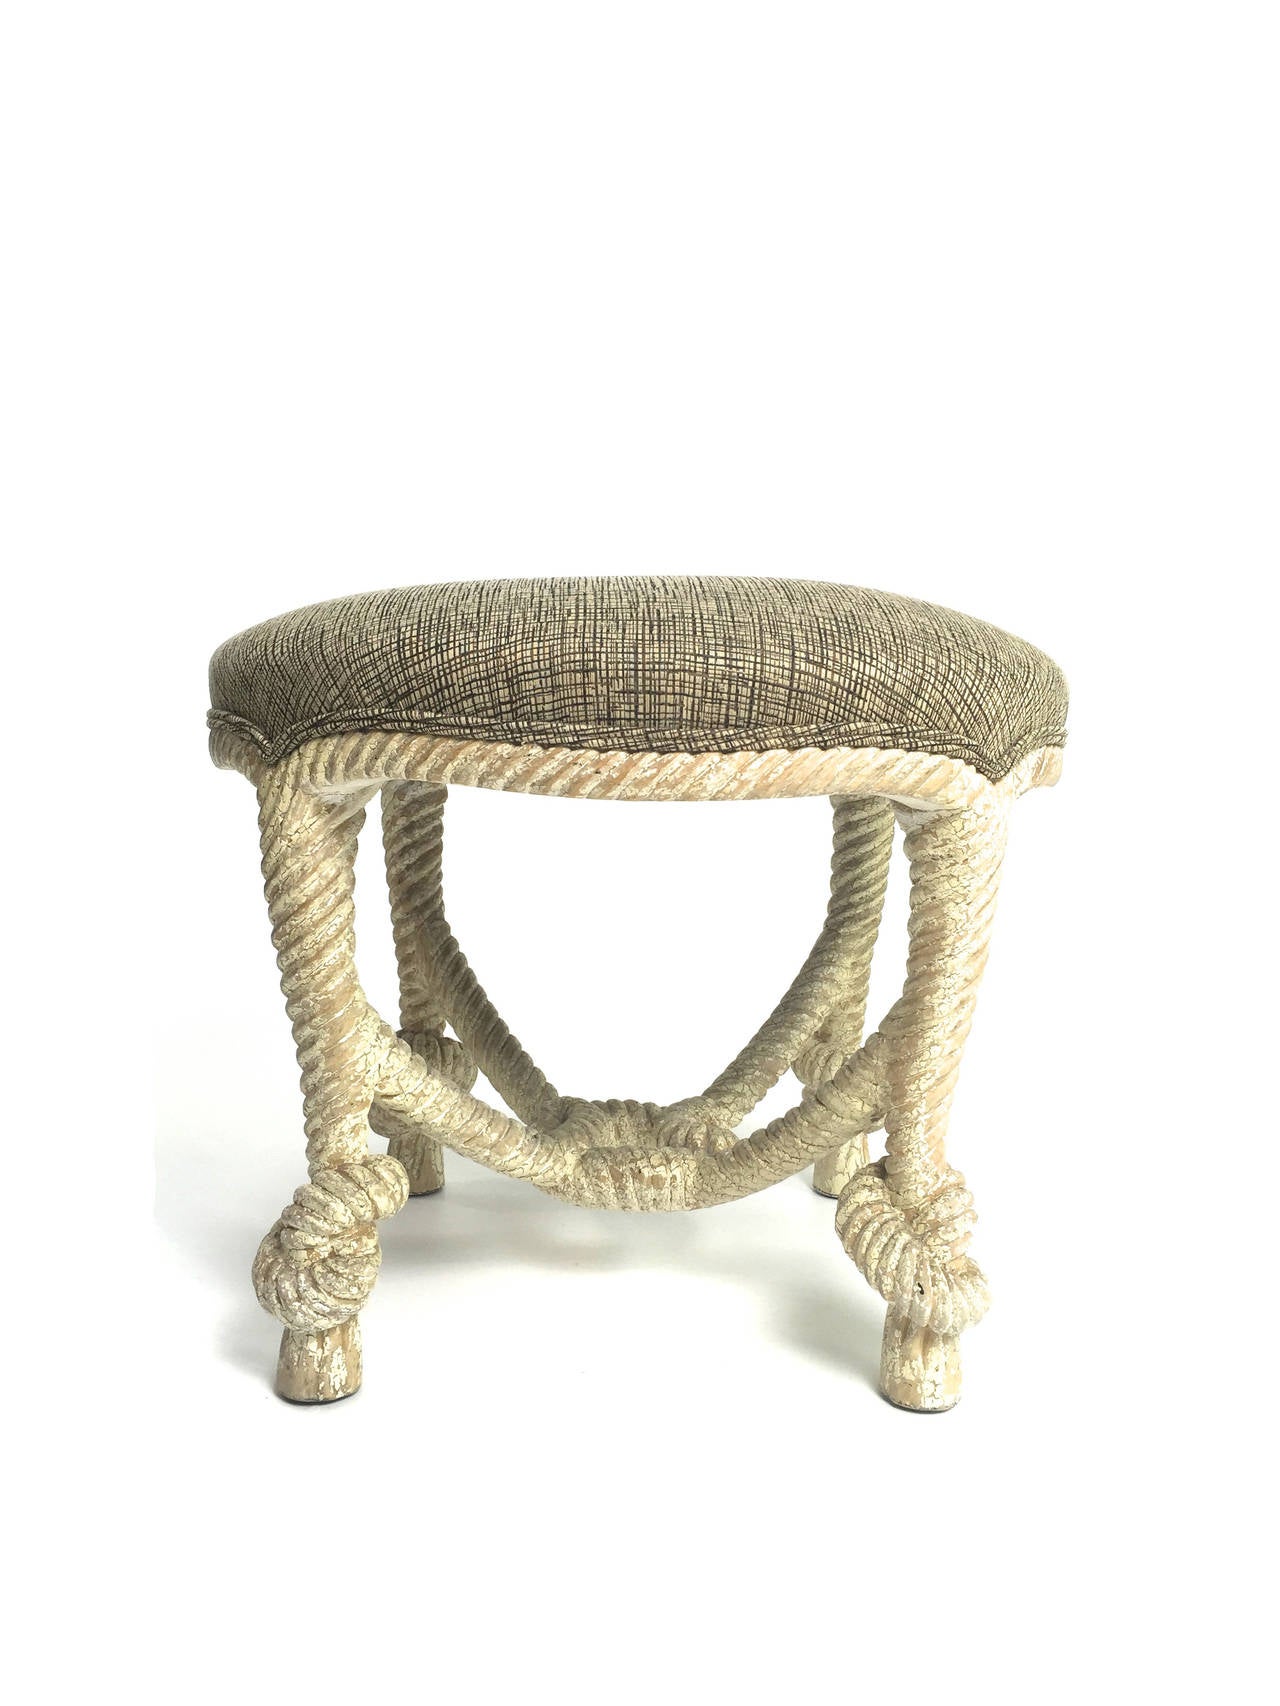 Neoclassical Revival Rope and Tassel Tabouret Stools by Michael Taylor